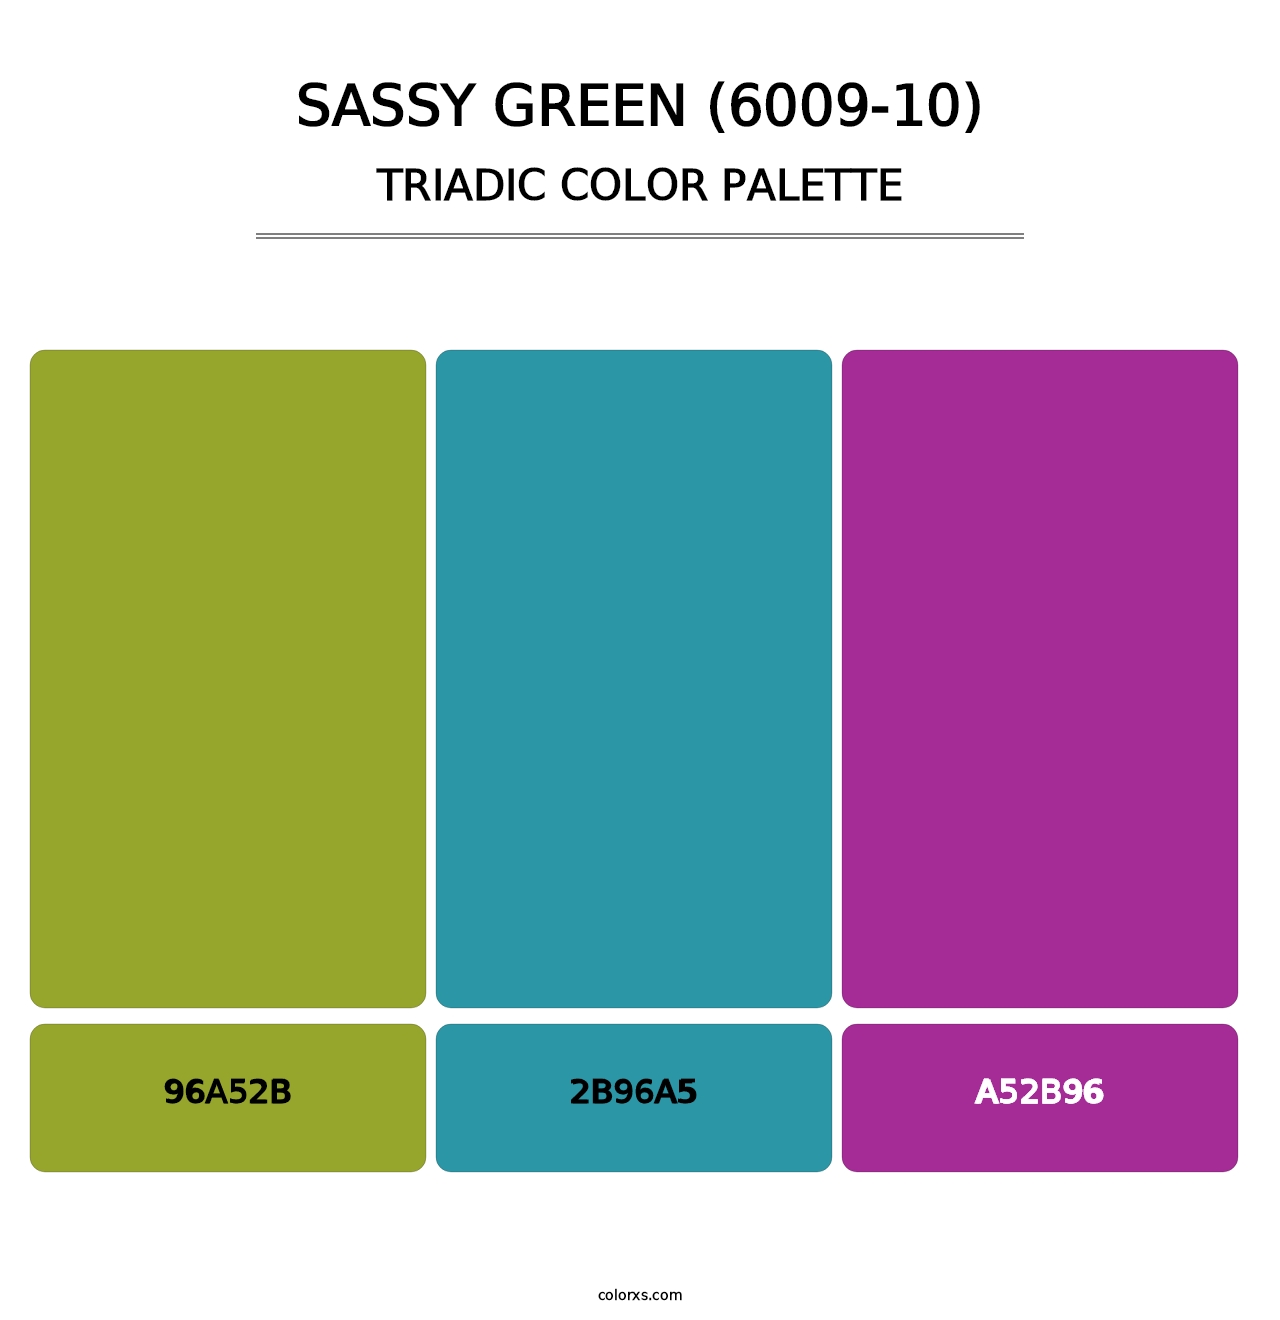 Sassy Green (6009-10) - Triadic Color Palette